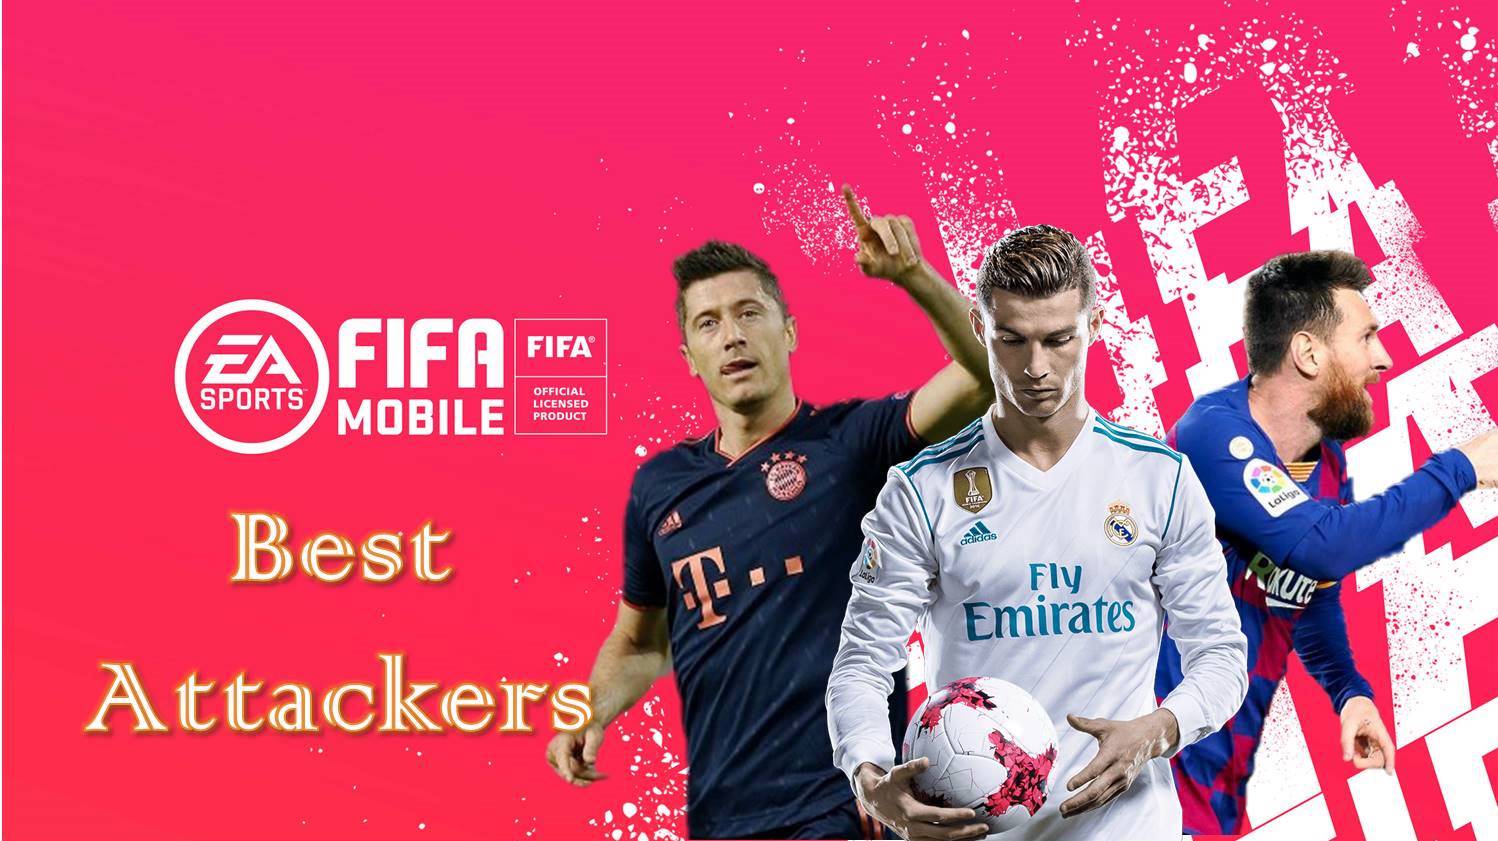 FIFA Mobile Best Attackers